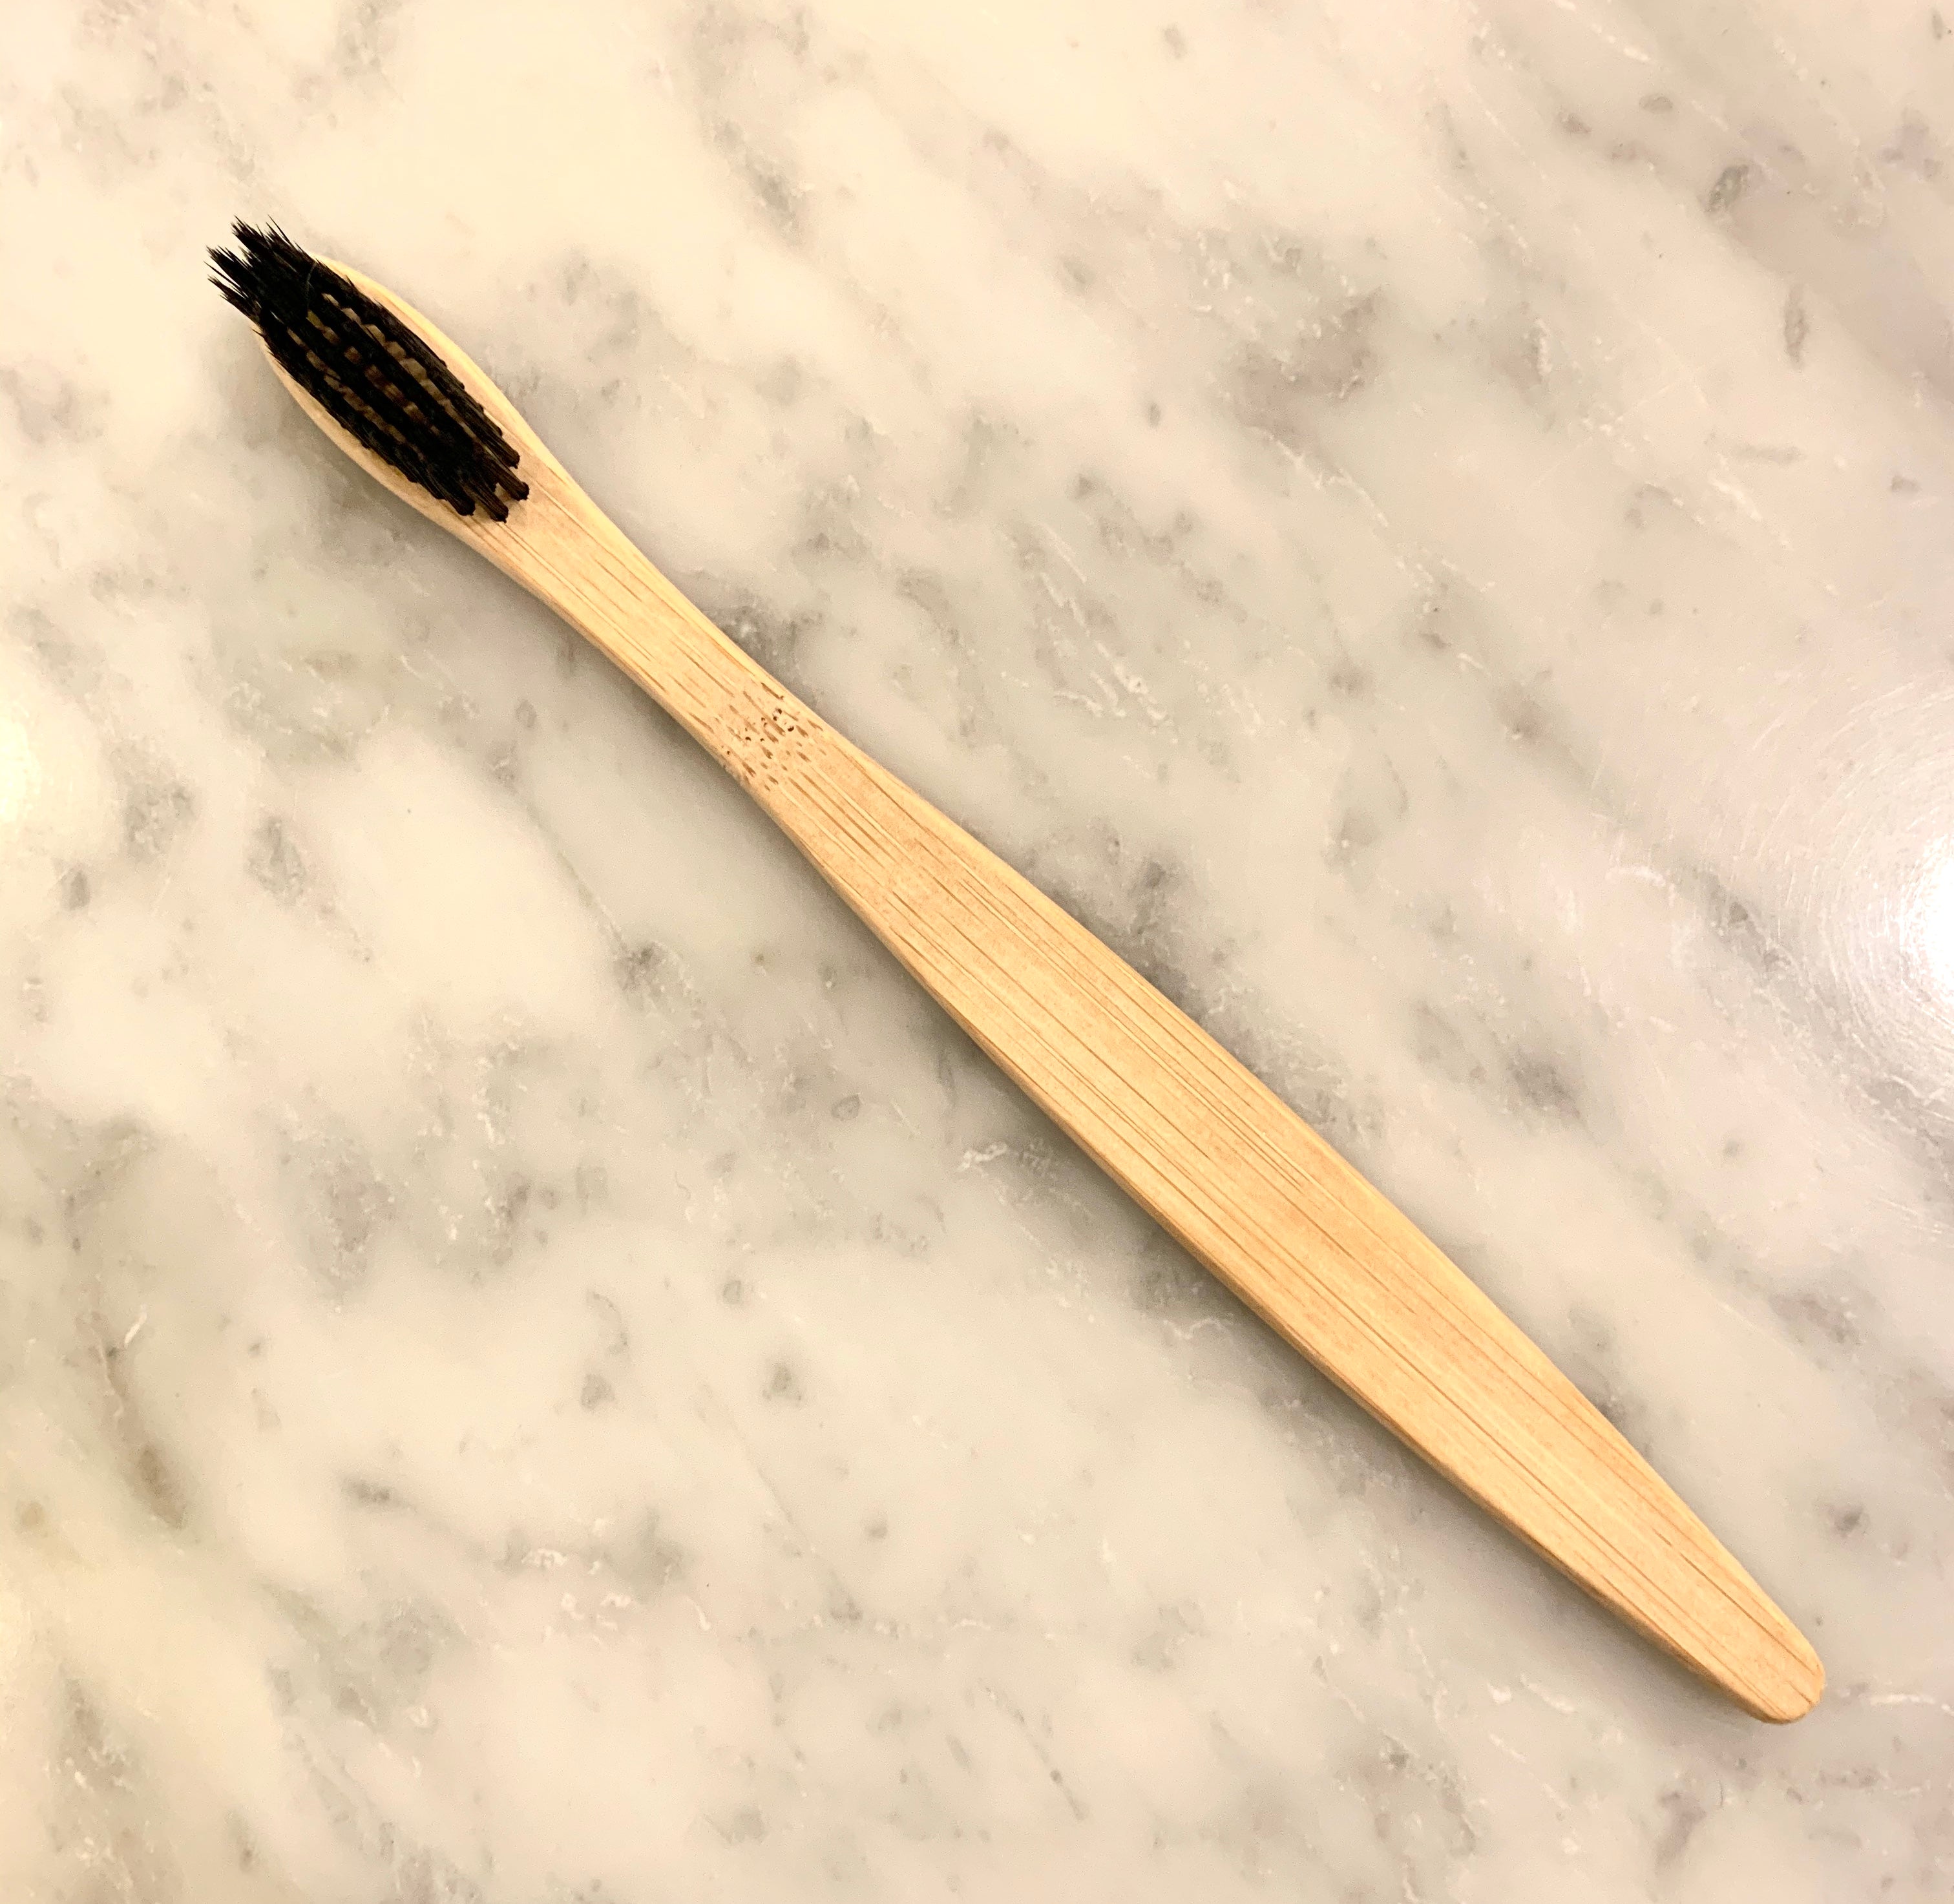 Bamboo Toothbrush - Handmade with Natural Ingredients. Hidden Forest Naturals